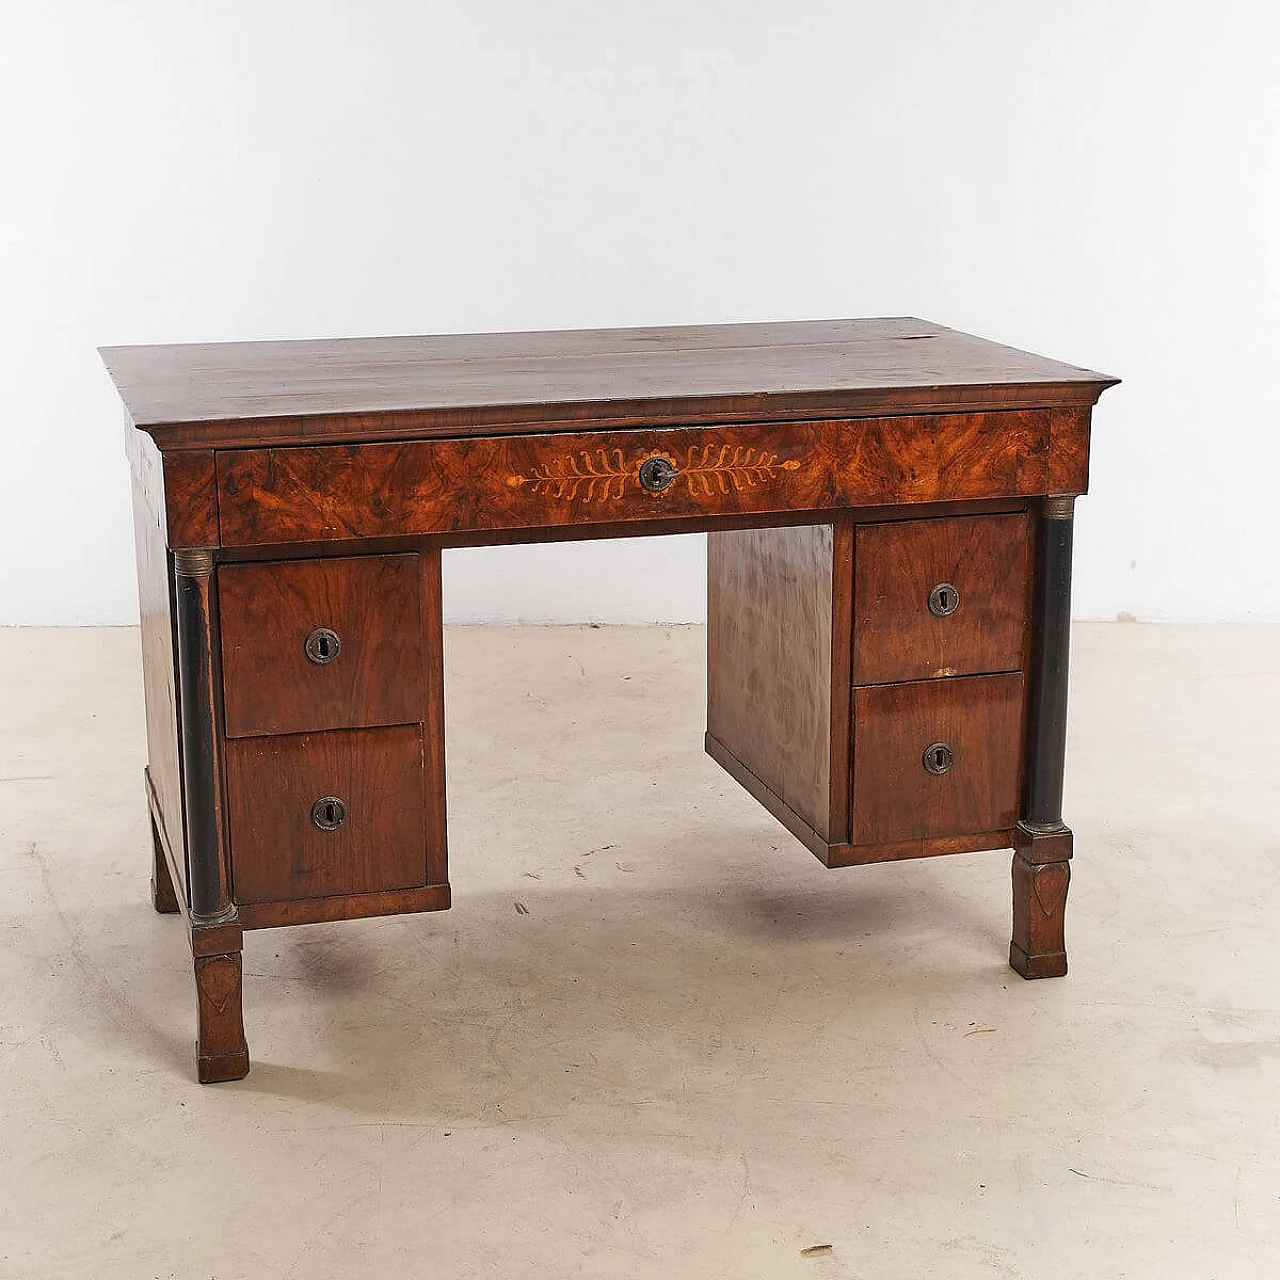 Empire-style panelled and inlaid wooden center desk, 19th century 2